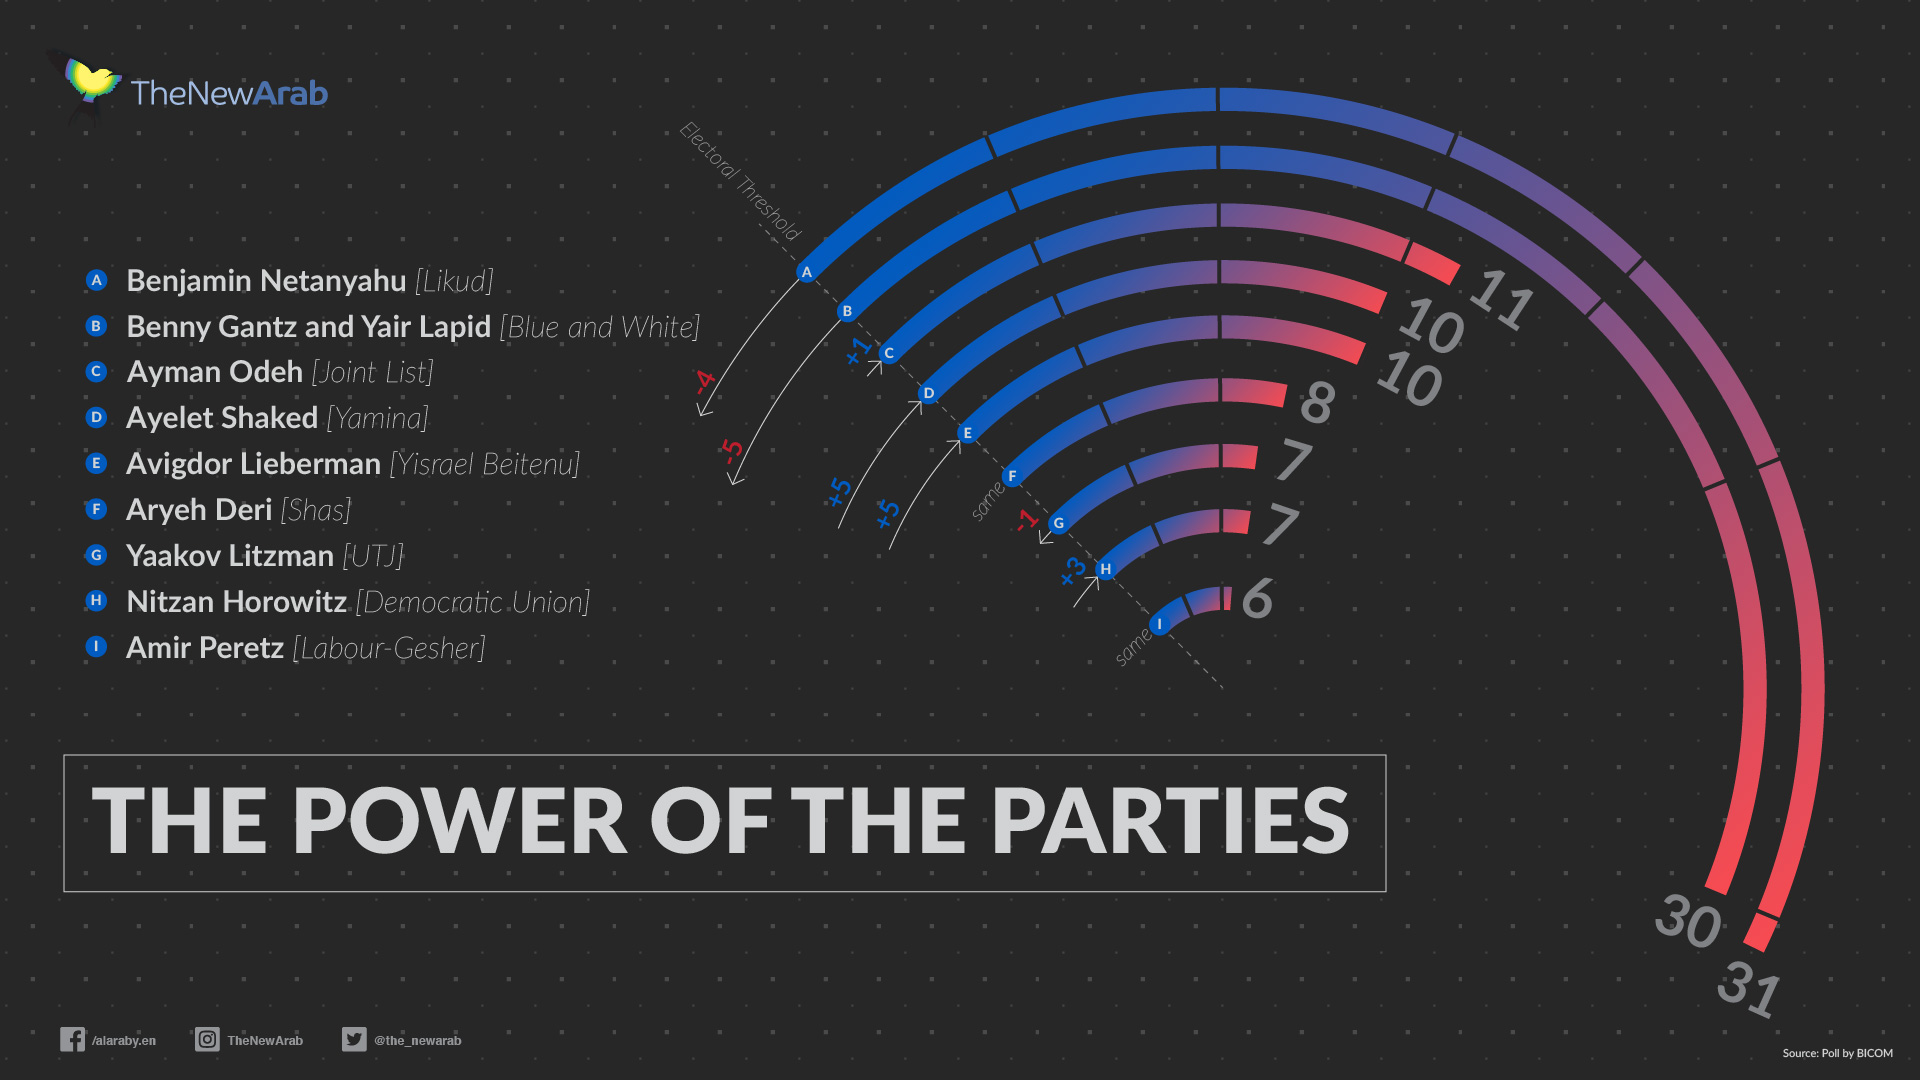 The Power of the Parties_1920x1080.jpg